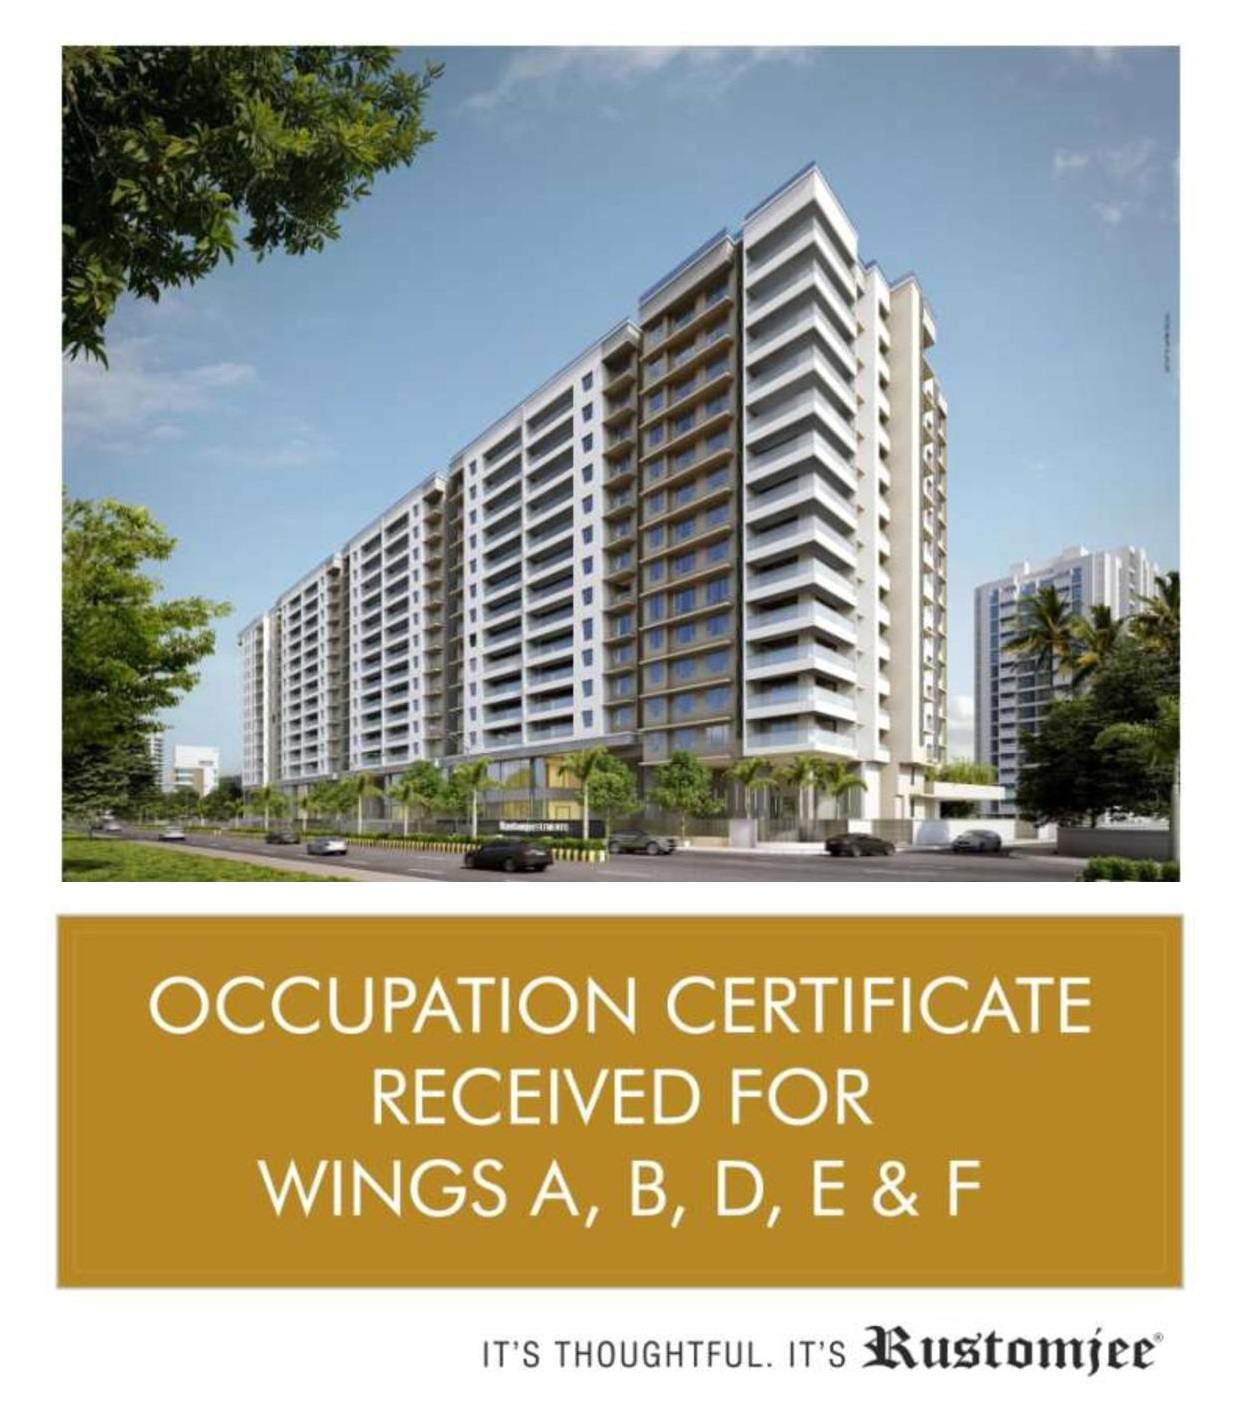 Occupation Certificate received for Wings A, B, D & F at Rustomjee Elements in Mumbai Update